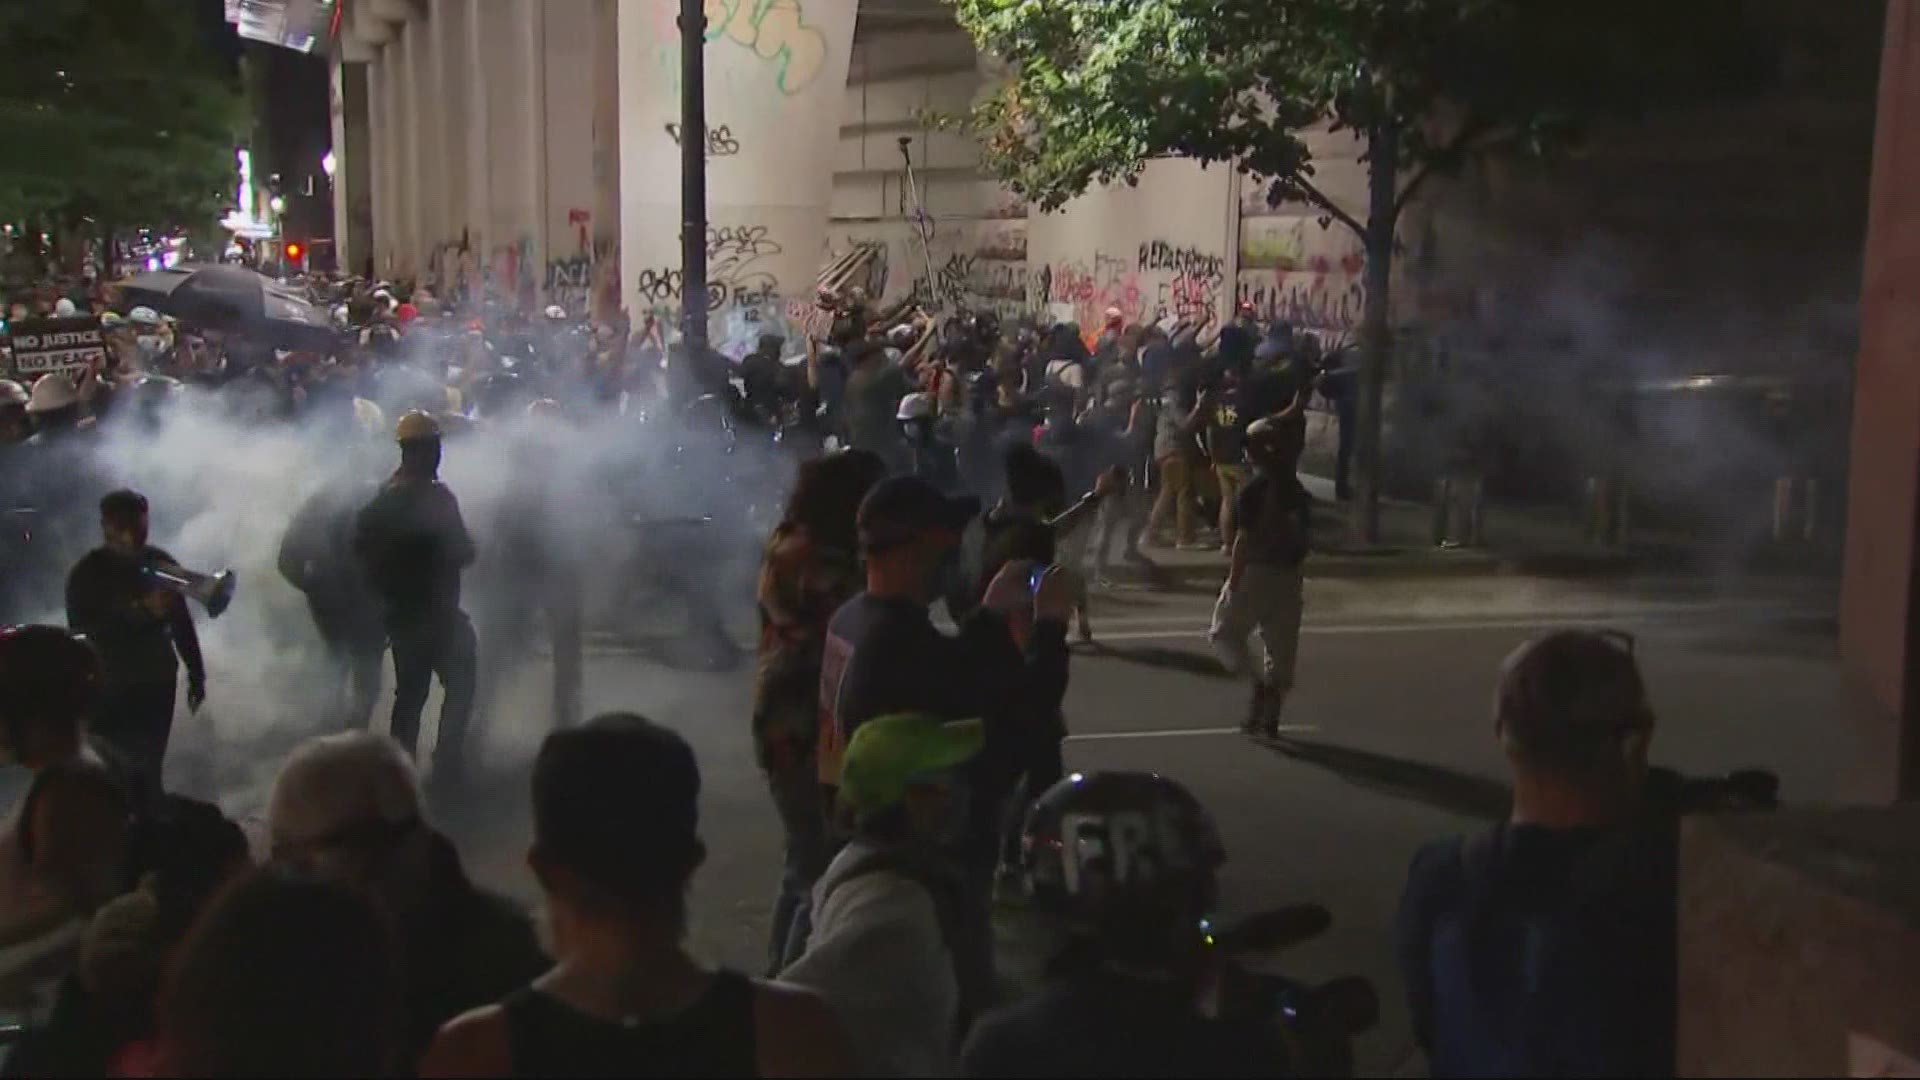 KGW got a hold of a report that said federal agents who came to Portland during last year’s protests were “unprepared.”